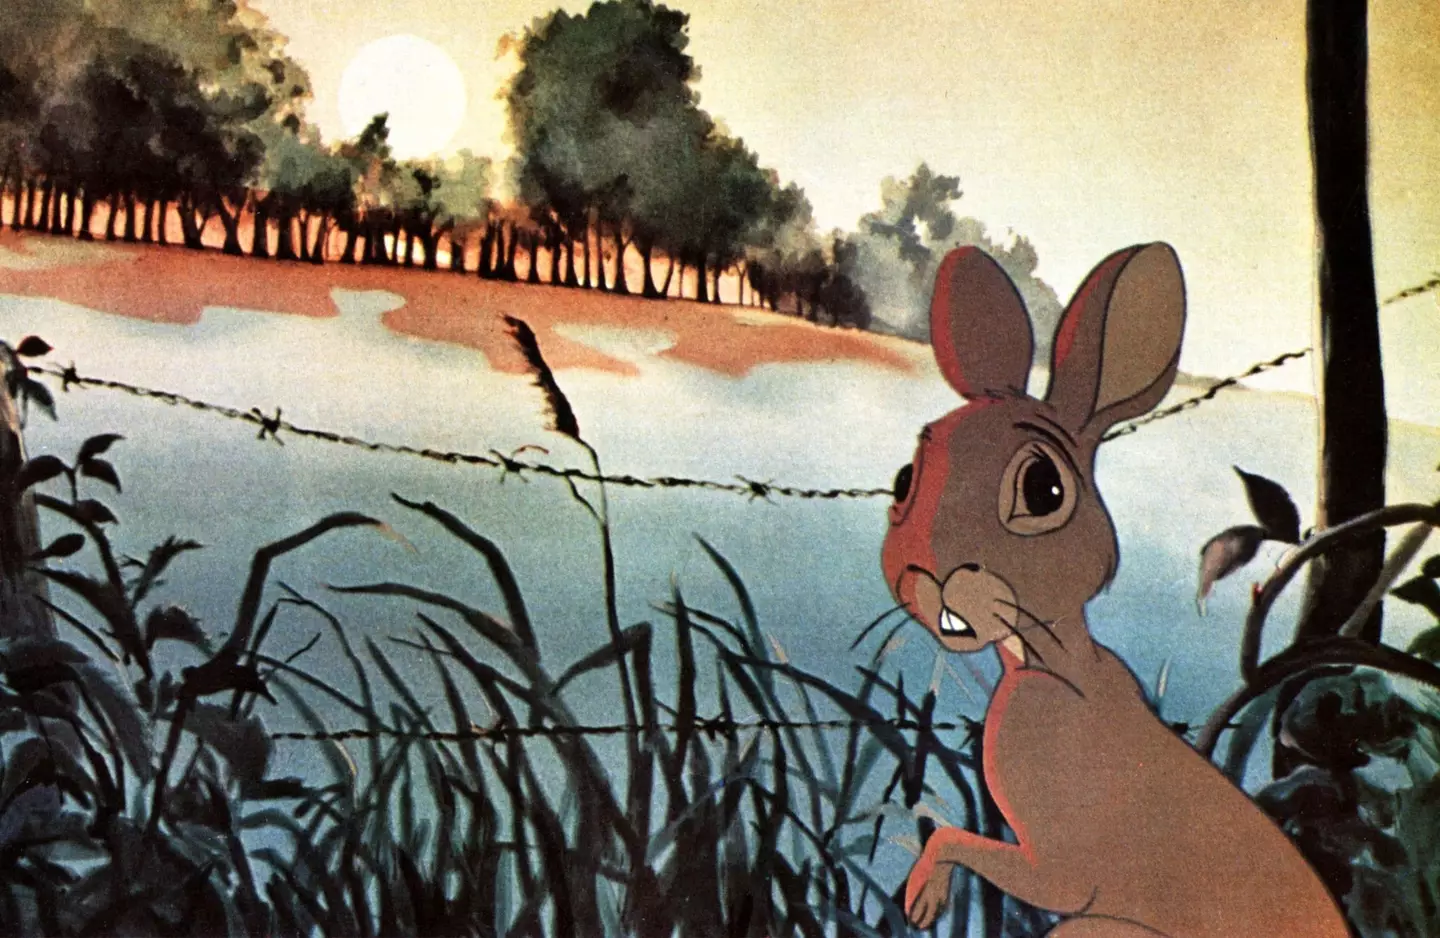 Watership Down is known for scaring kids who saw it at the time.